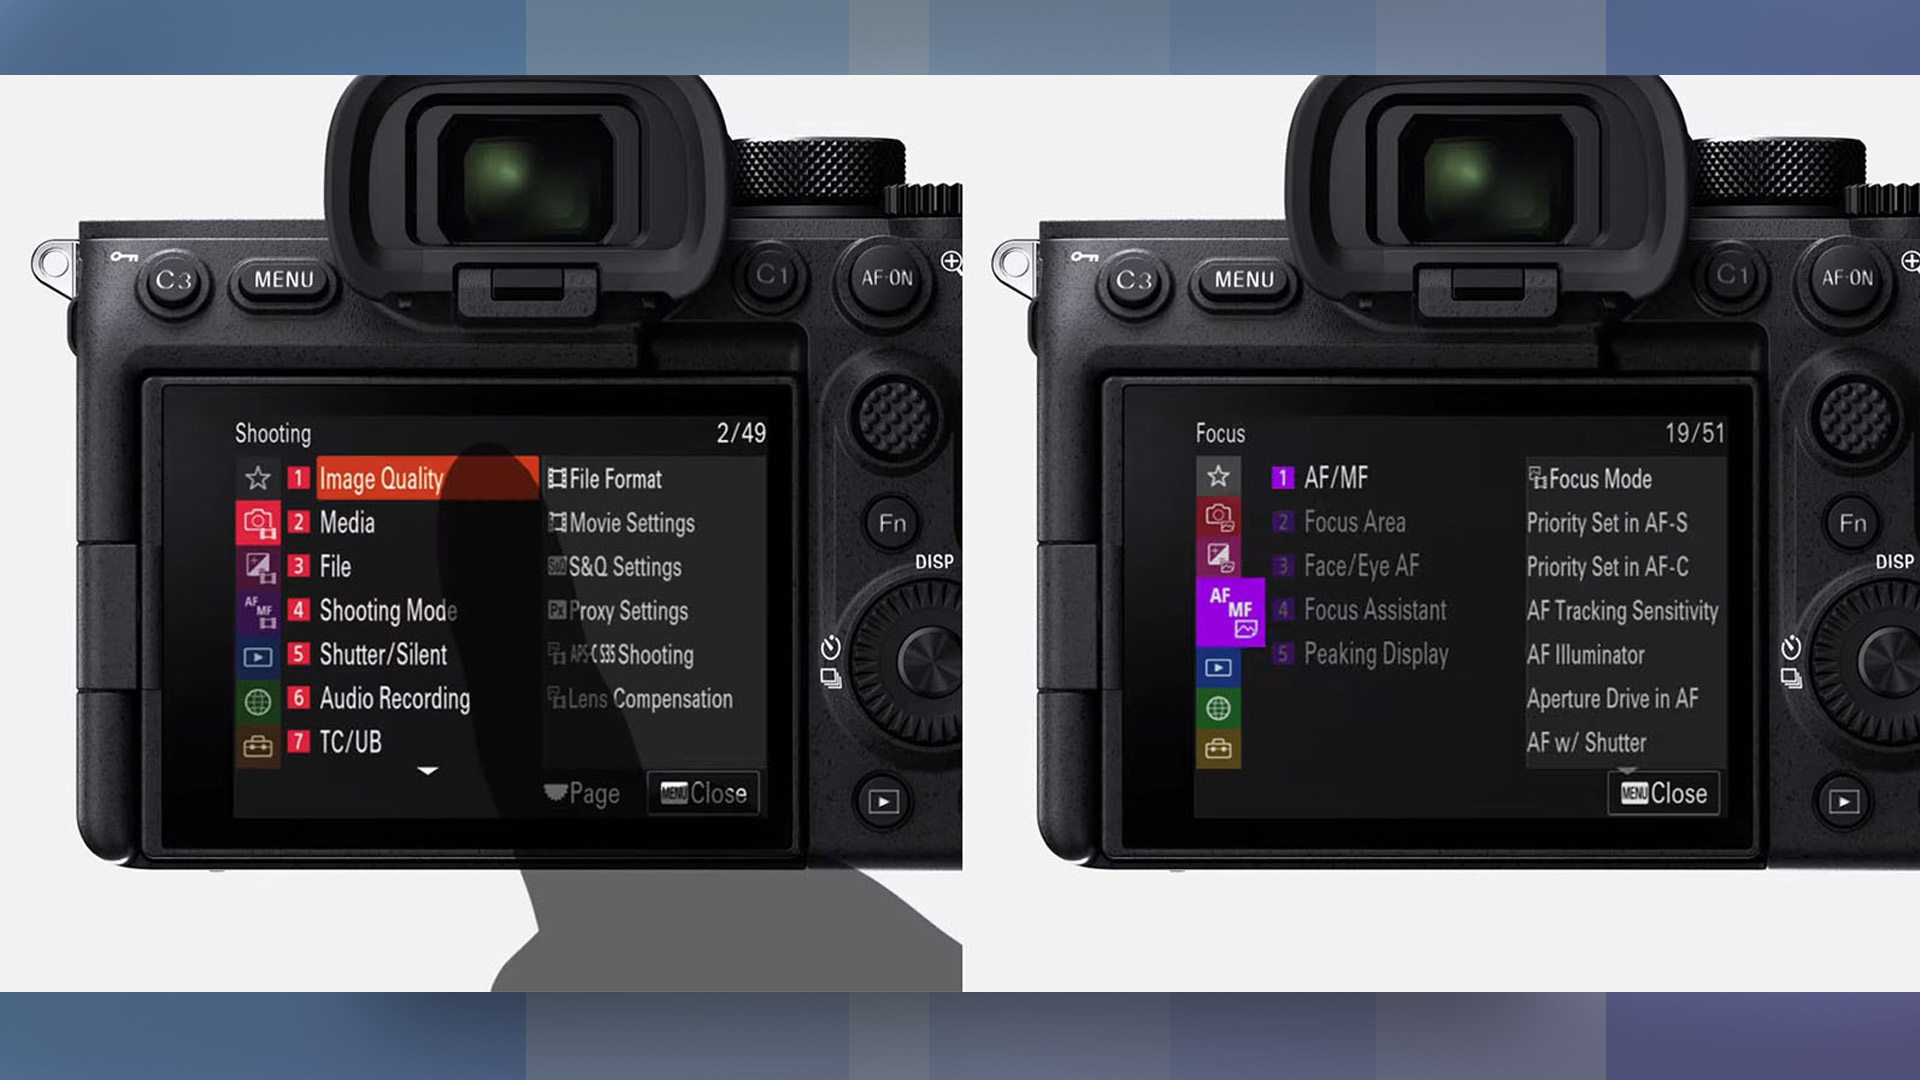 A mock-up of Sony's new menu system on the rumored Sony A7 IV